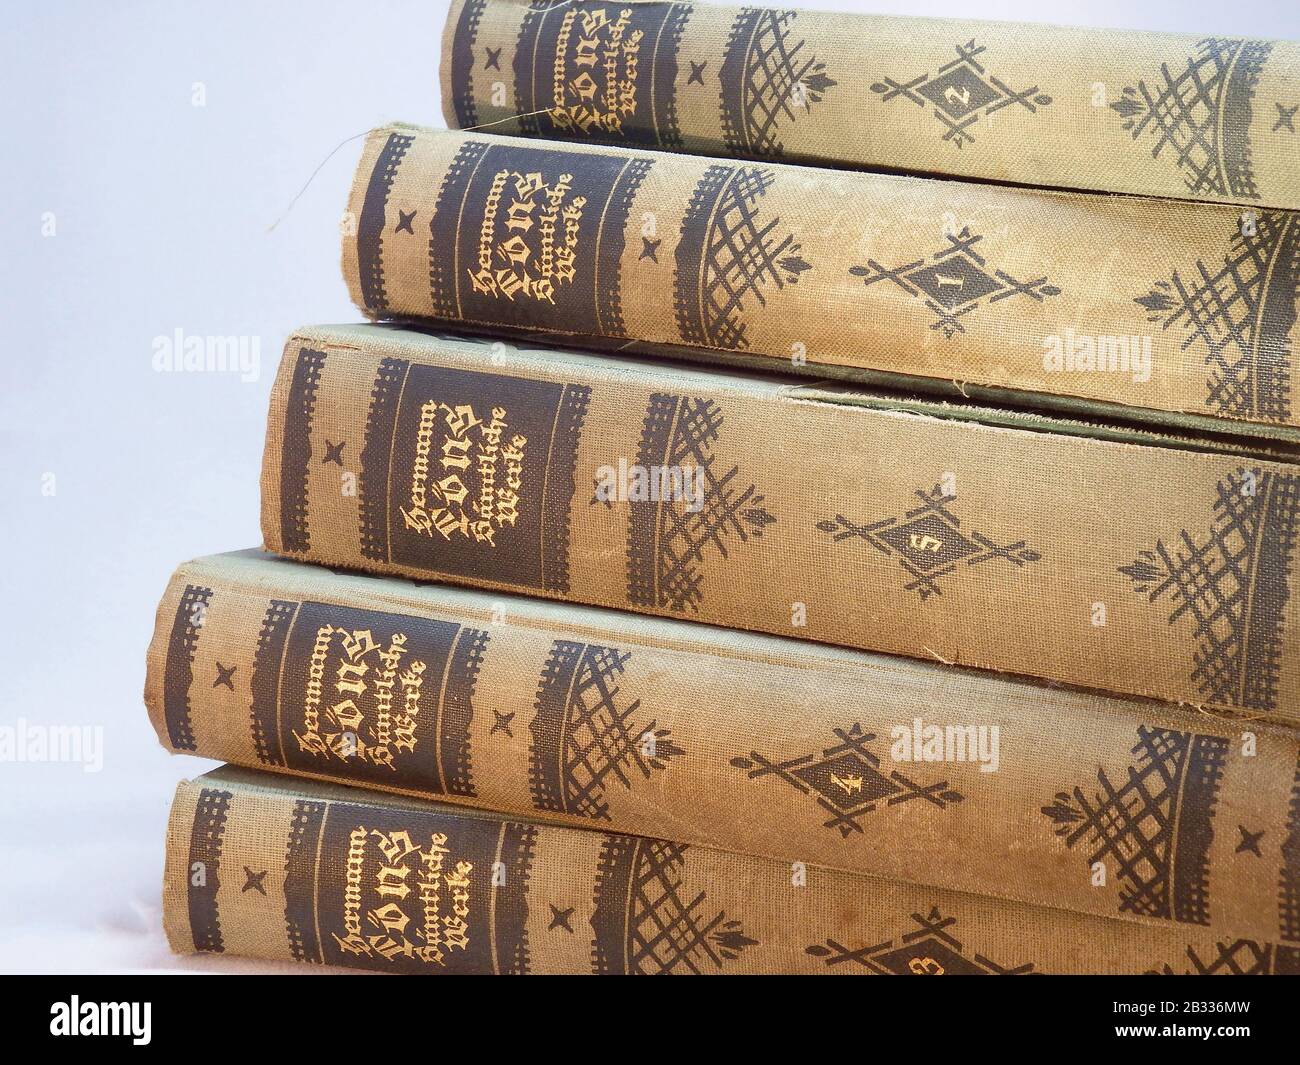 Heiligenhaus, Nrw, Germany - February 12, 2014: Photo of a pile of old books of the famous writer Hermann Lons.  Here see the works of 1 to 5 from a t Stock Photo